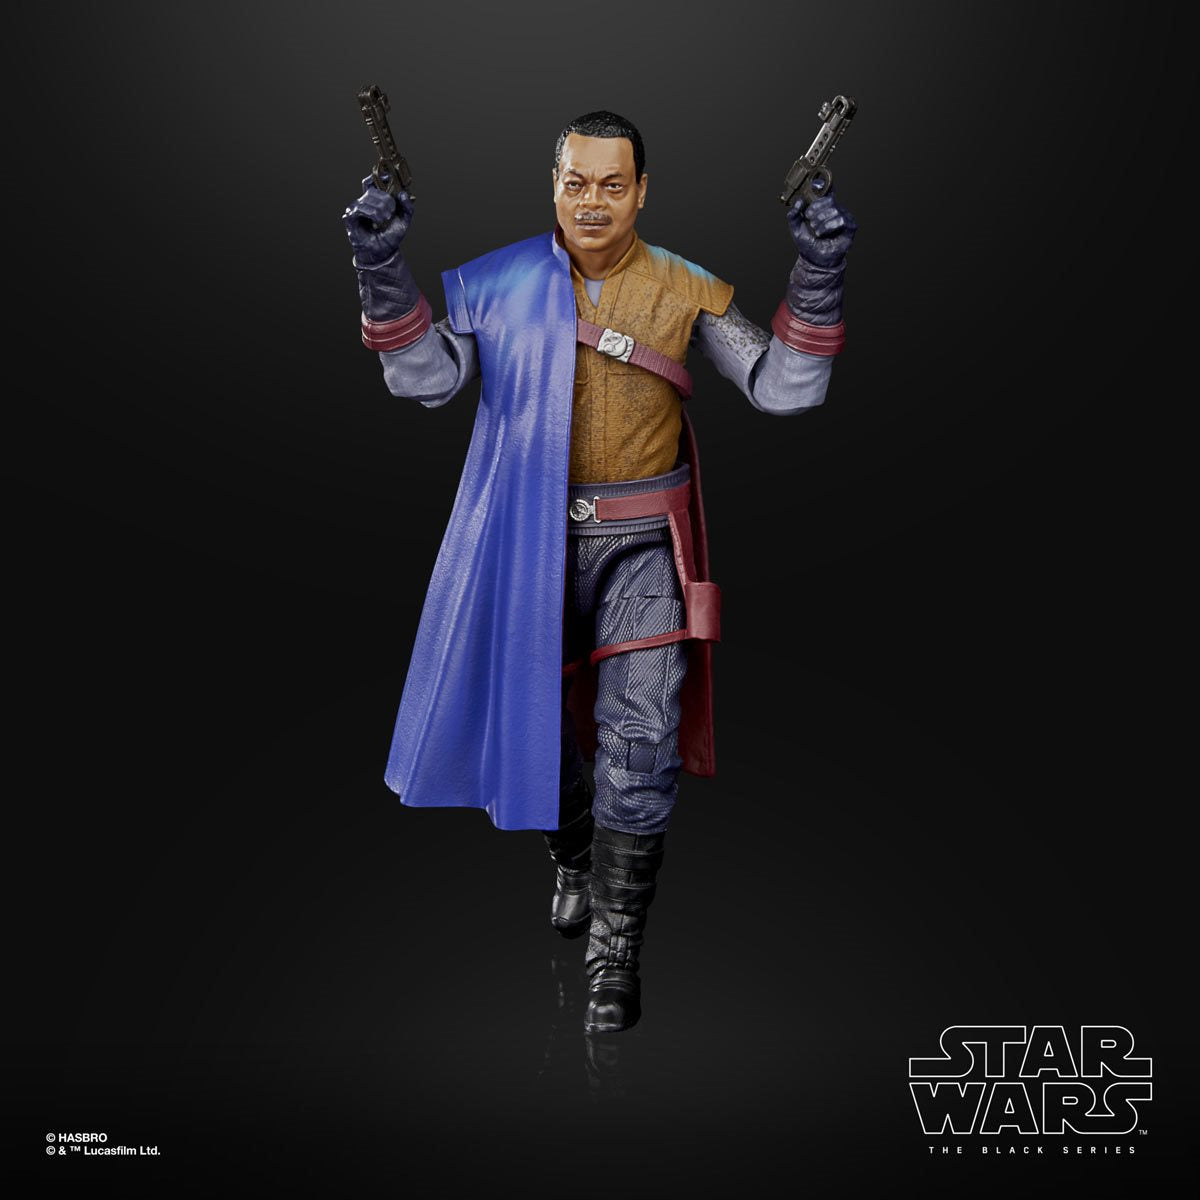 Star Wars The Black Series Credit Collection Greef Karga Toy 15-cm-Scale The Mandalorian Collectible Figure